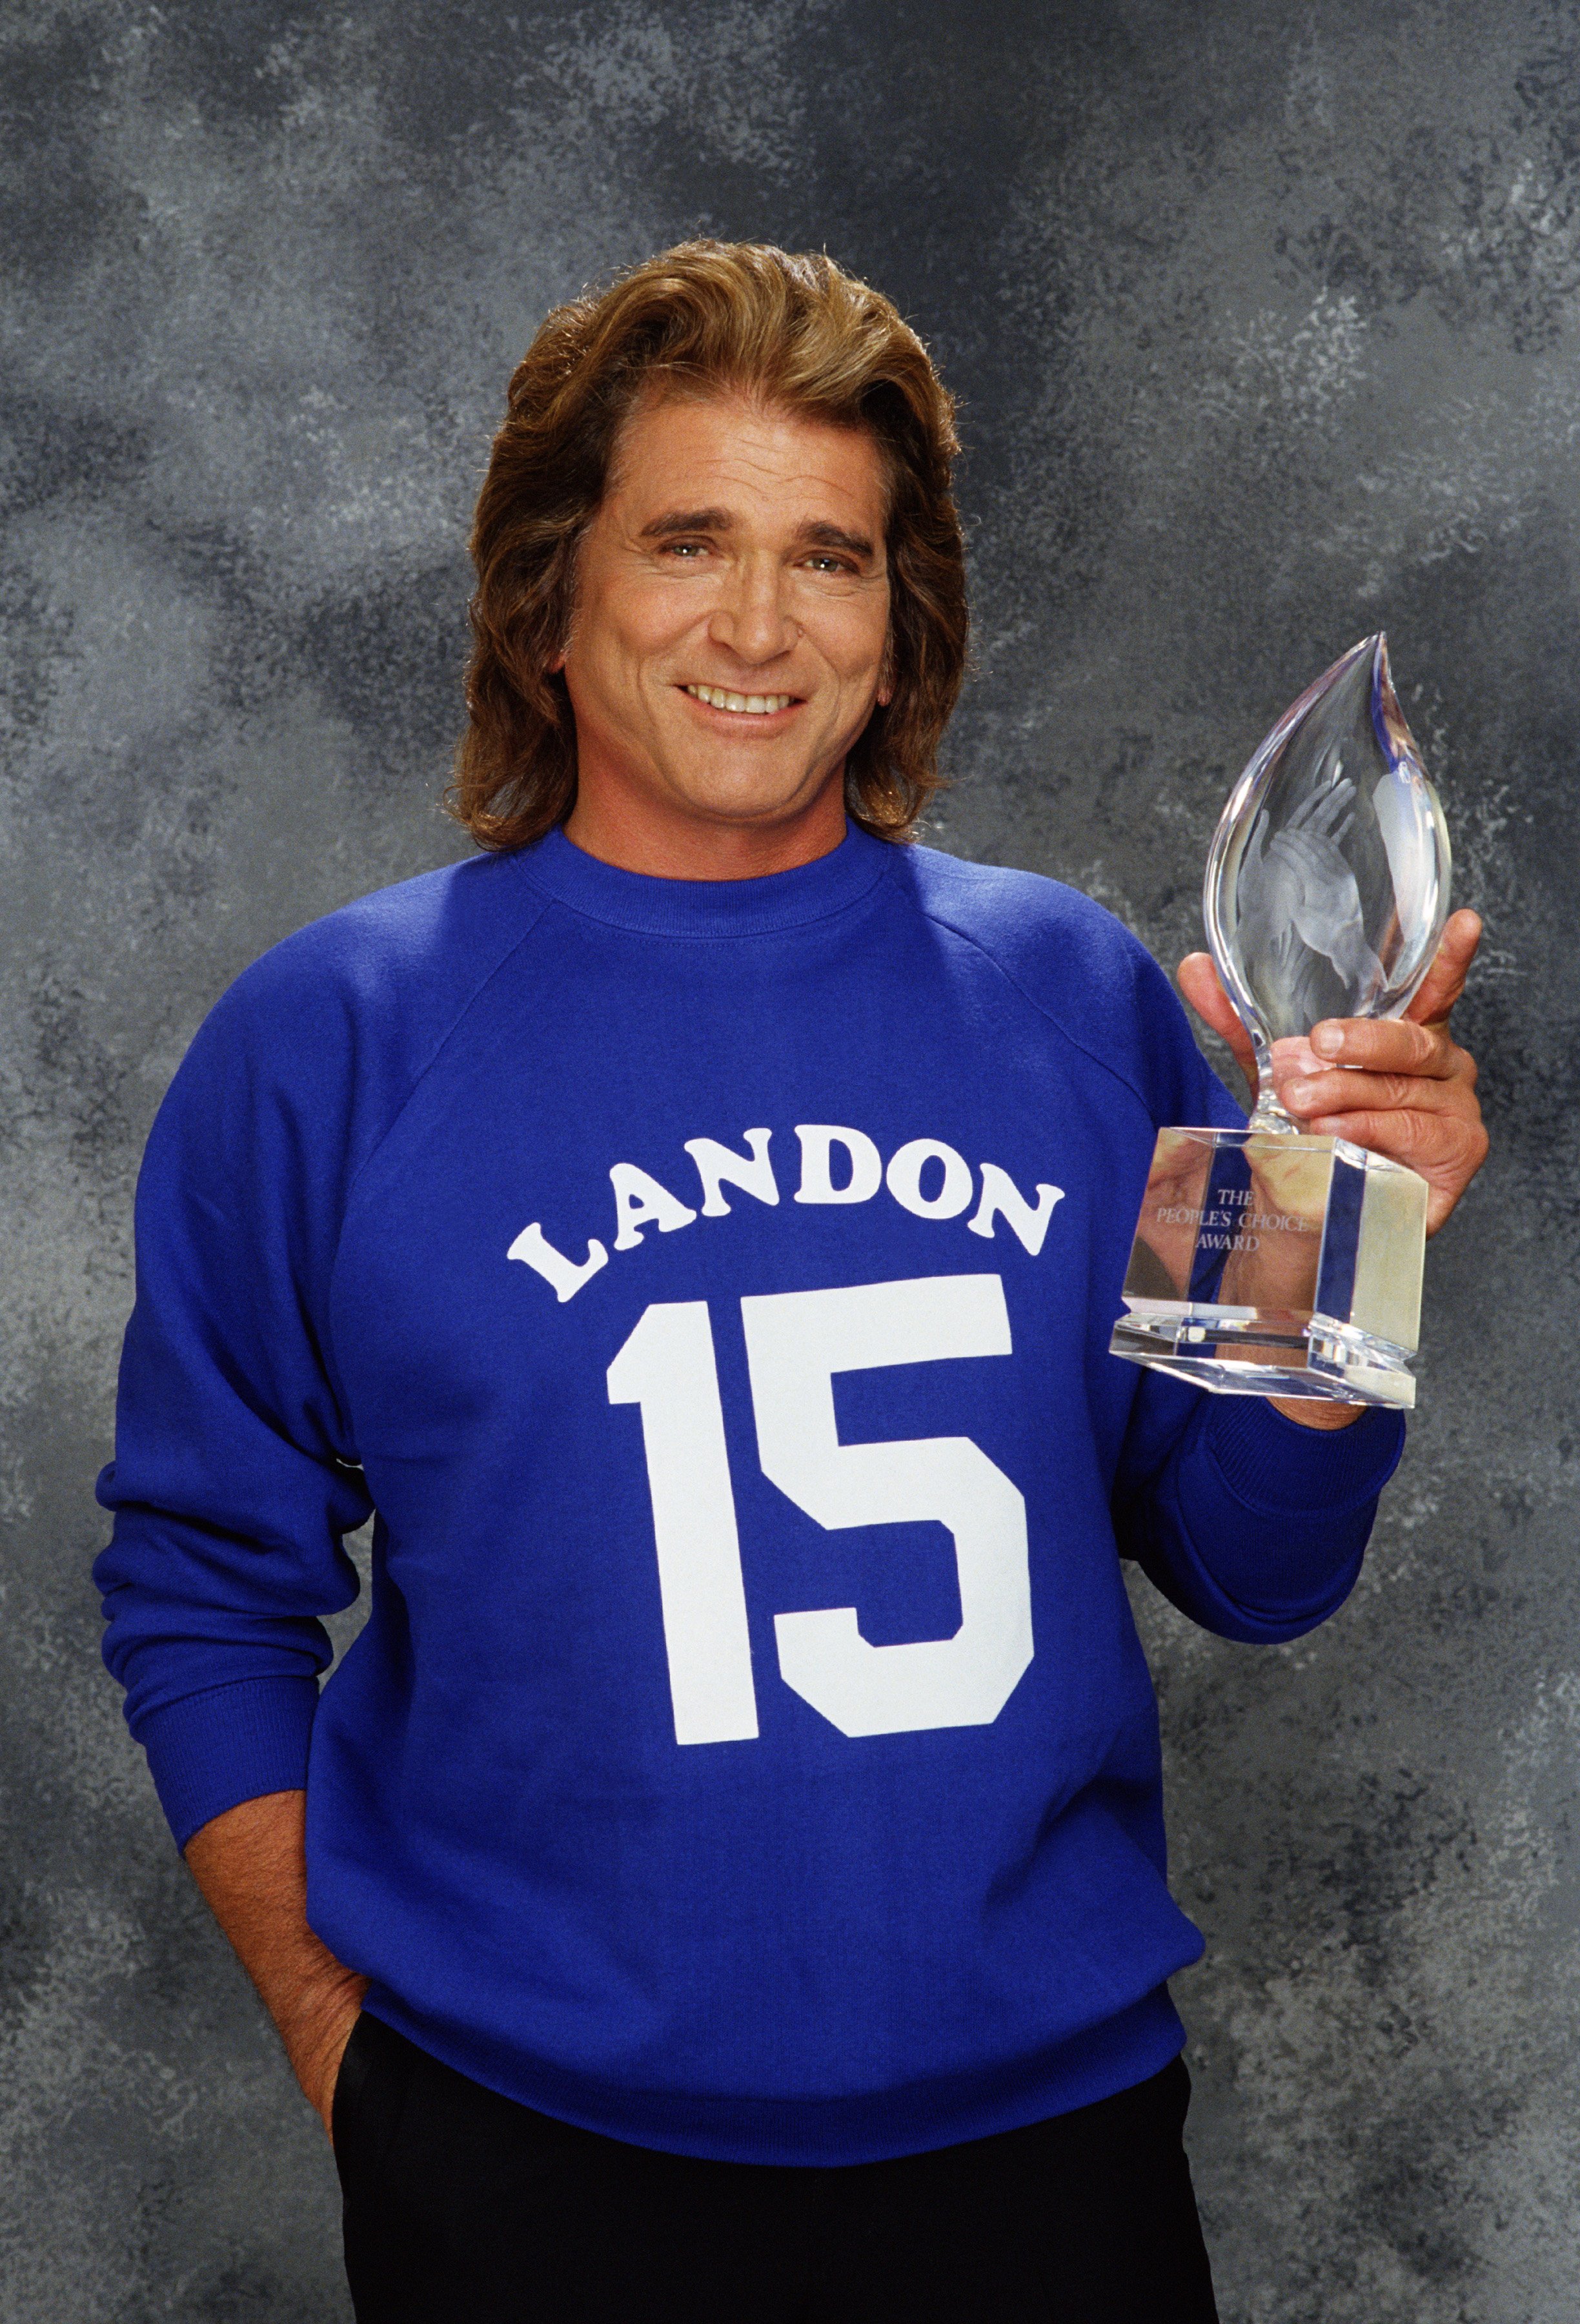 Michael Landon poses with the People's Choice Award during a 1989 Beverly Hills, California, photo portrait session. | Source: Getty Images.